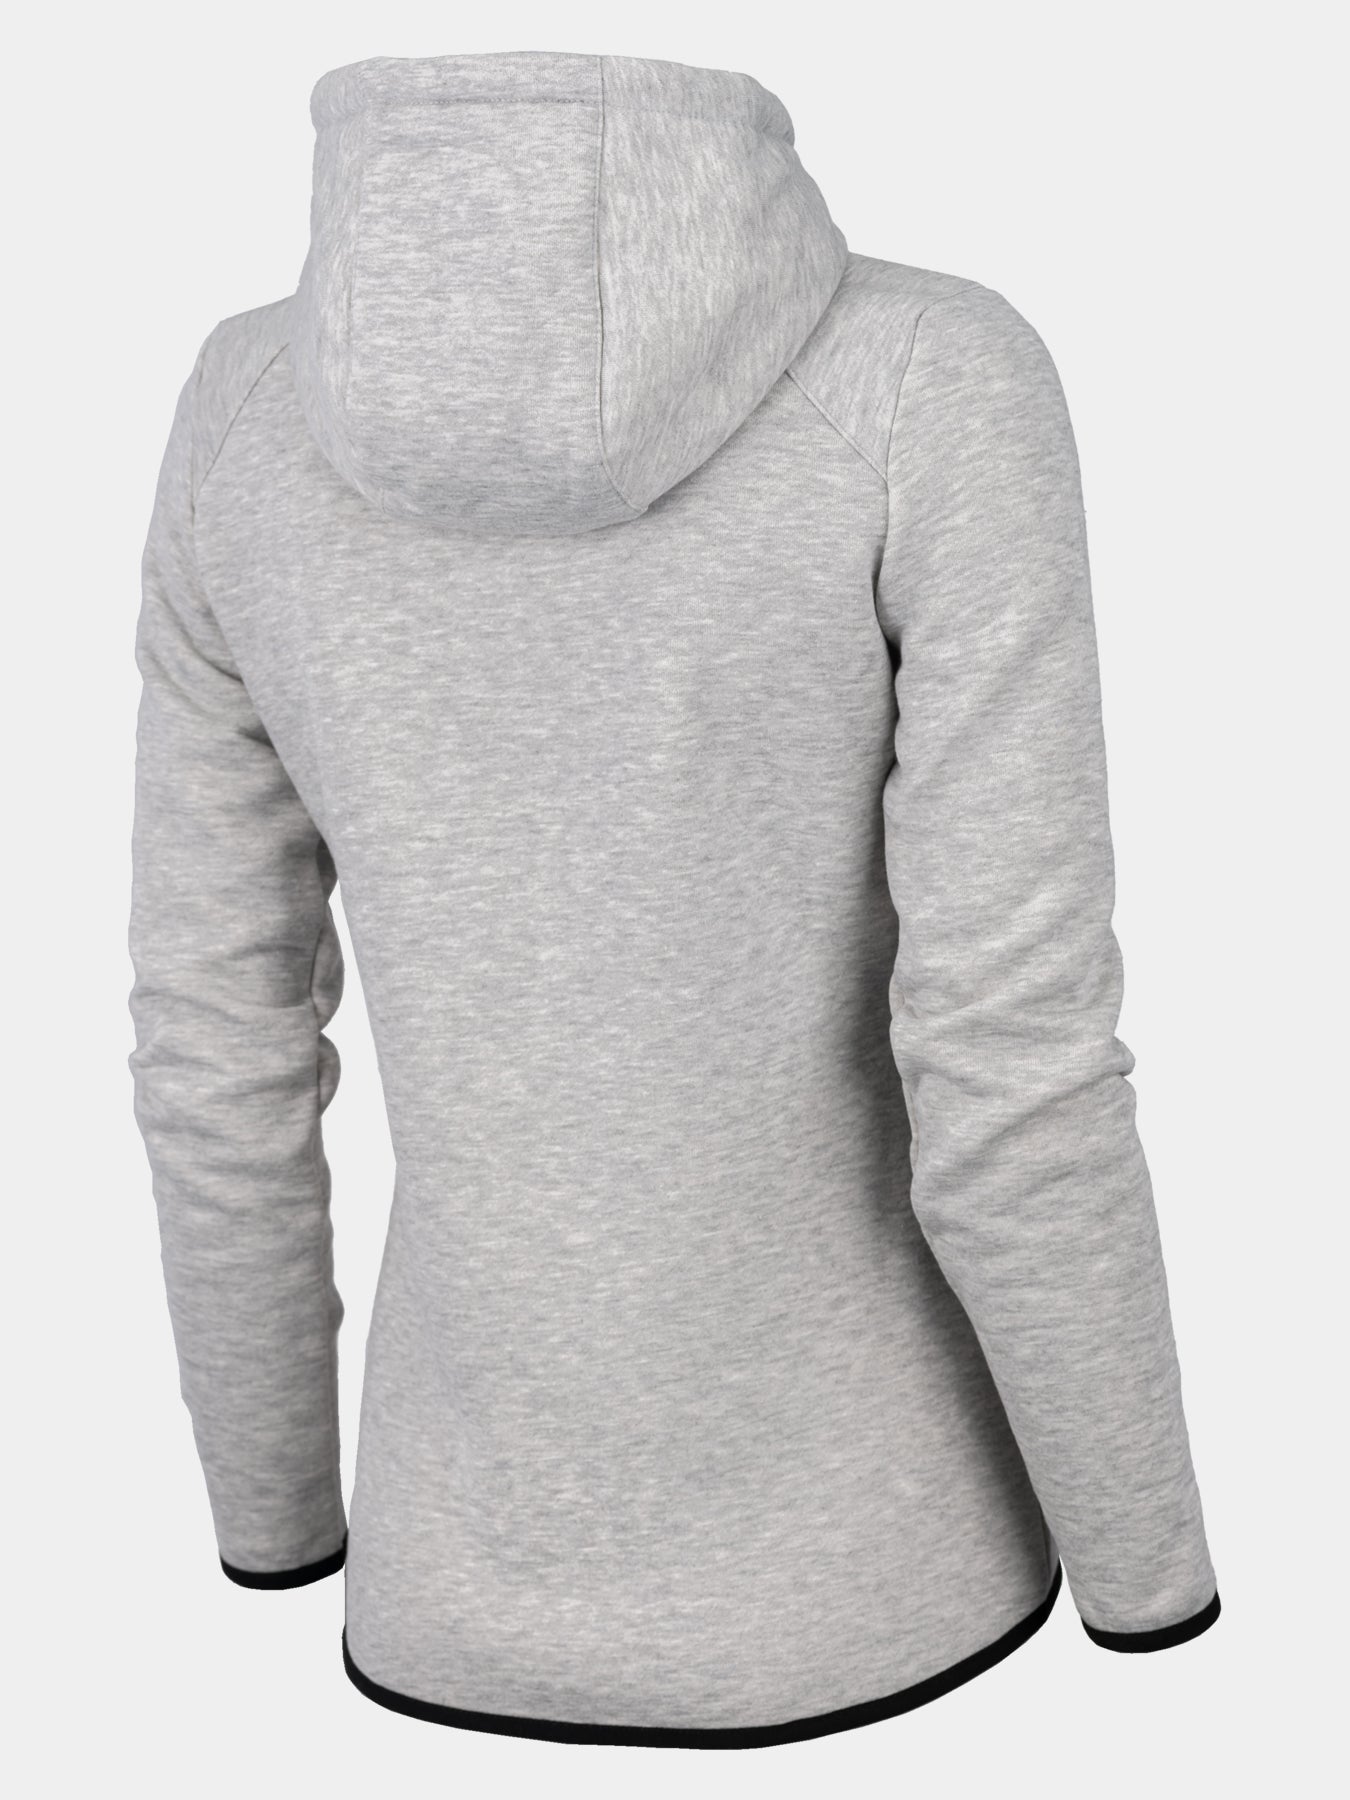 Revolution Tech Gym Running Hoodie For Women With Zip Pockets